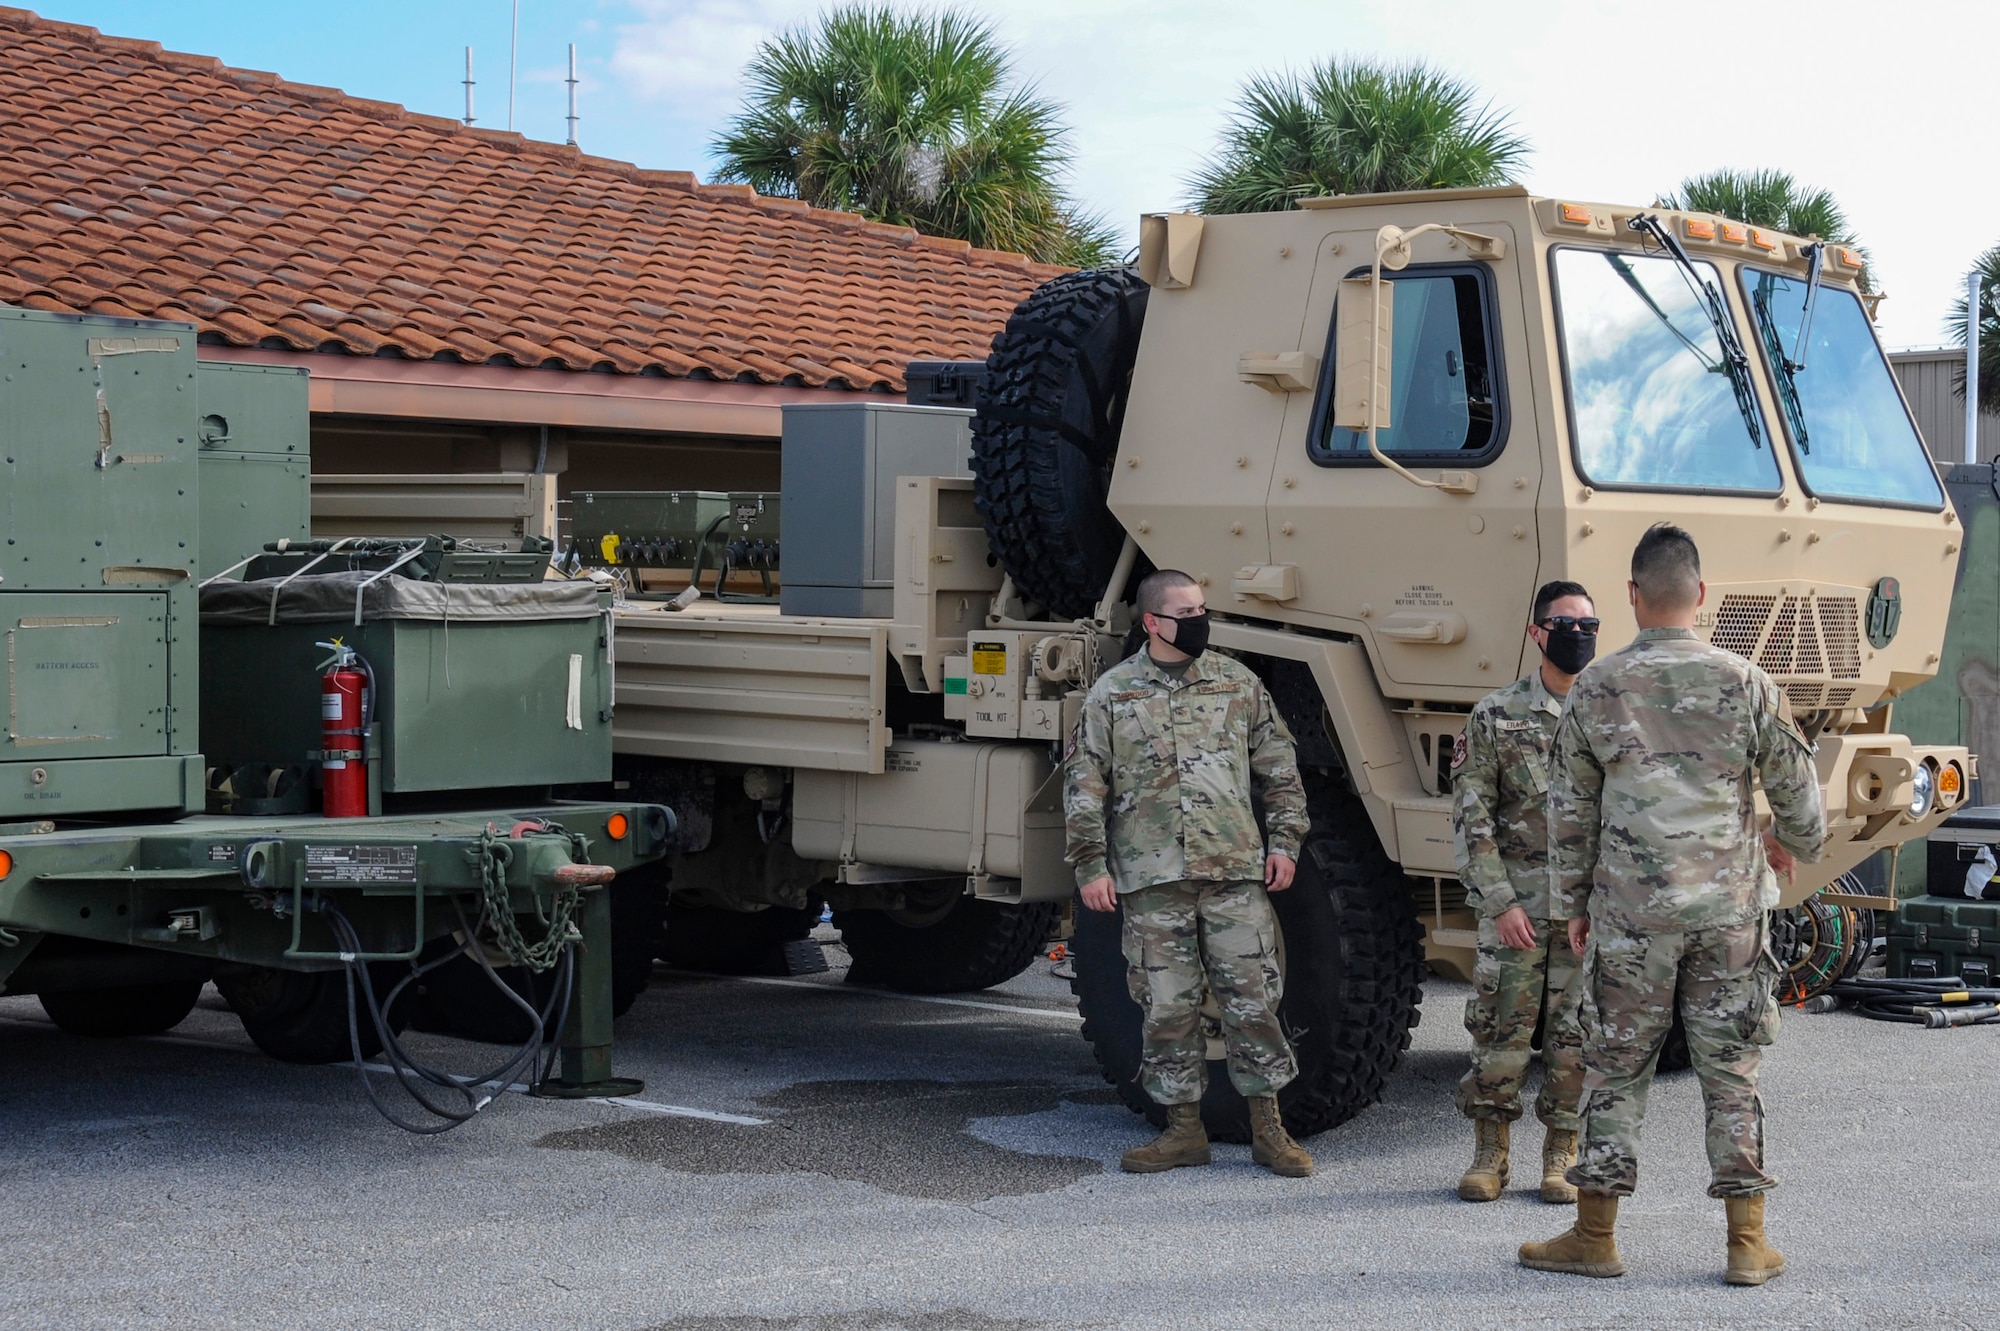 Airmen from the 729th Air Control Squadron pack up gear after at Patrick Air Force Base, Fla., after supporting NORAD mission during SpaceX launch.  The 729th ACS provided air tracking support for the Falcon 9 Crew-1 launch on Nov. 15, 2020. (U.S. Space Force Photo by 2nd Lt. Christian Little)